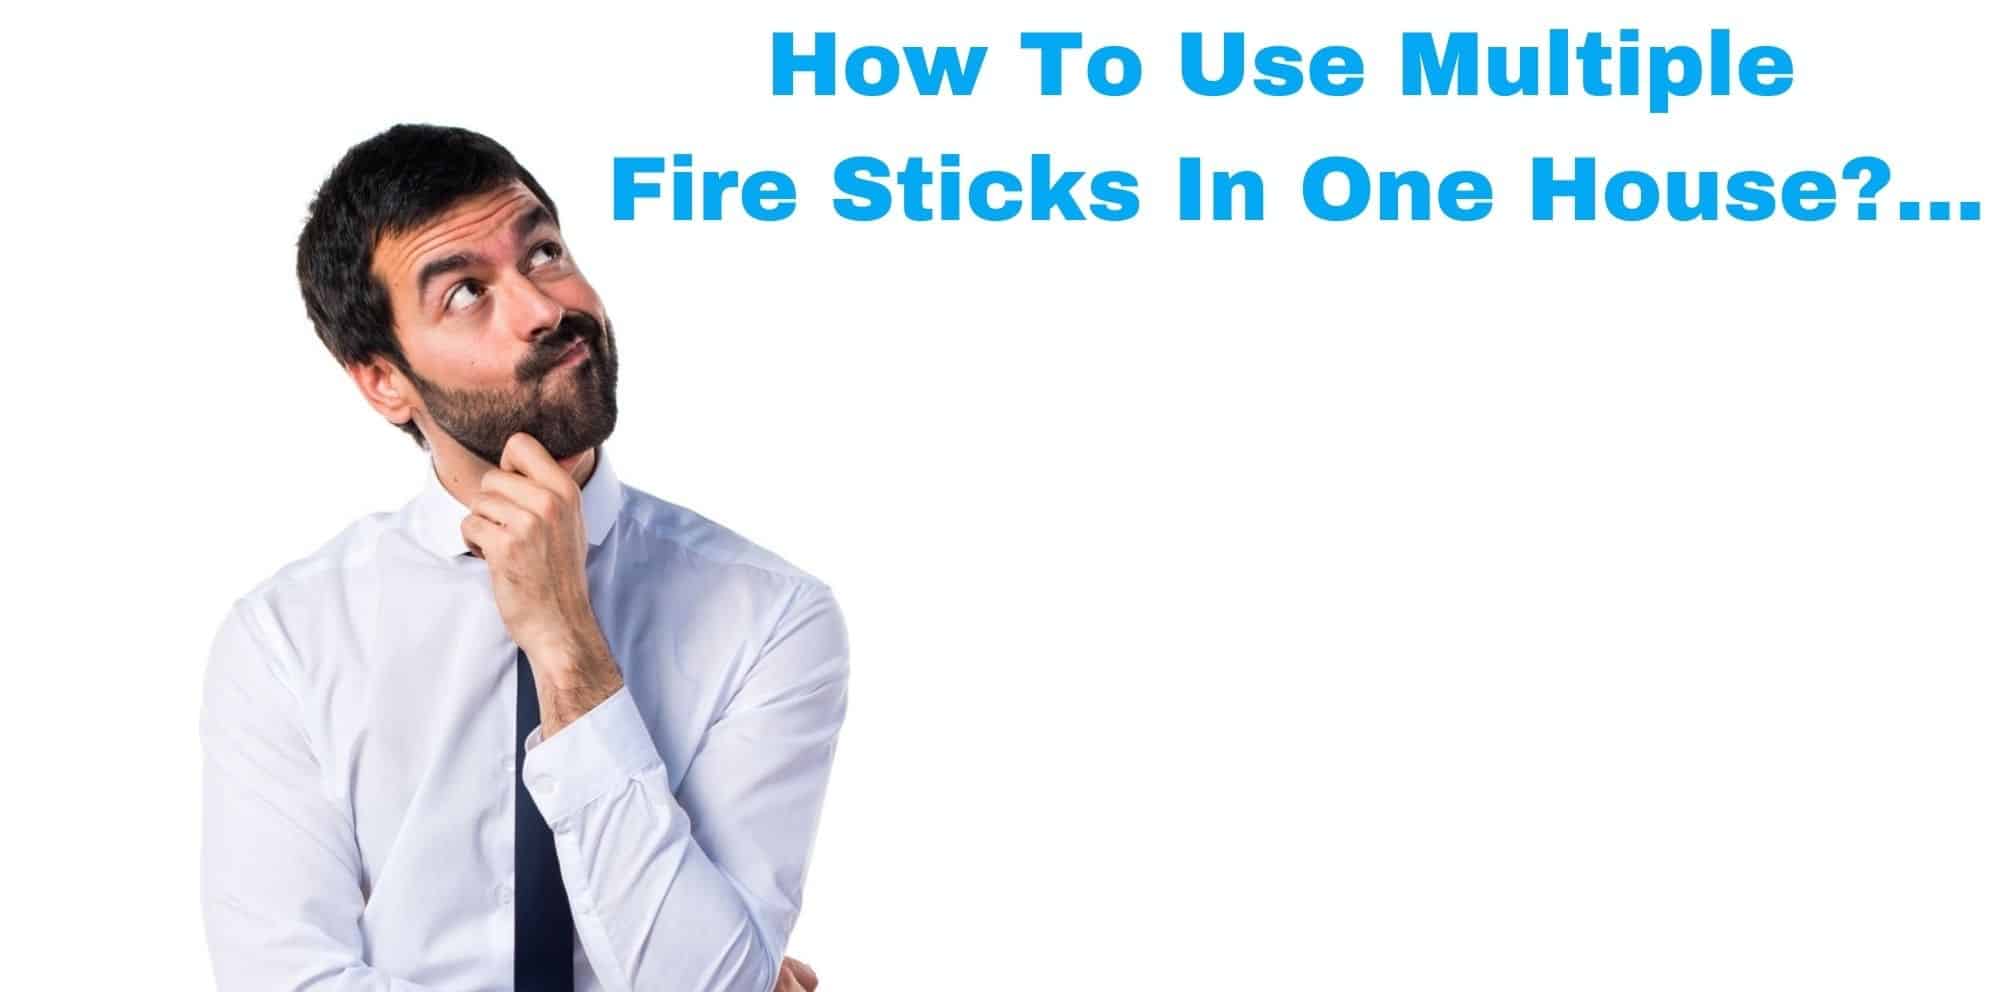 How To Use Multiple Fire Sticks In One House